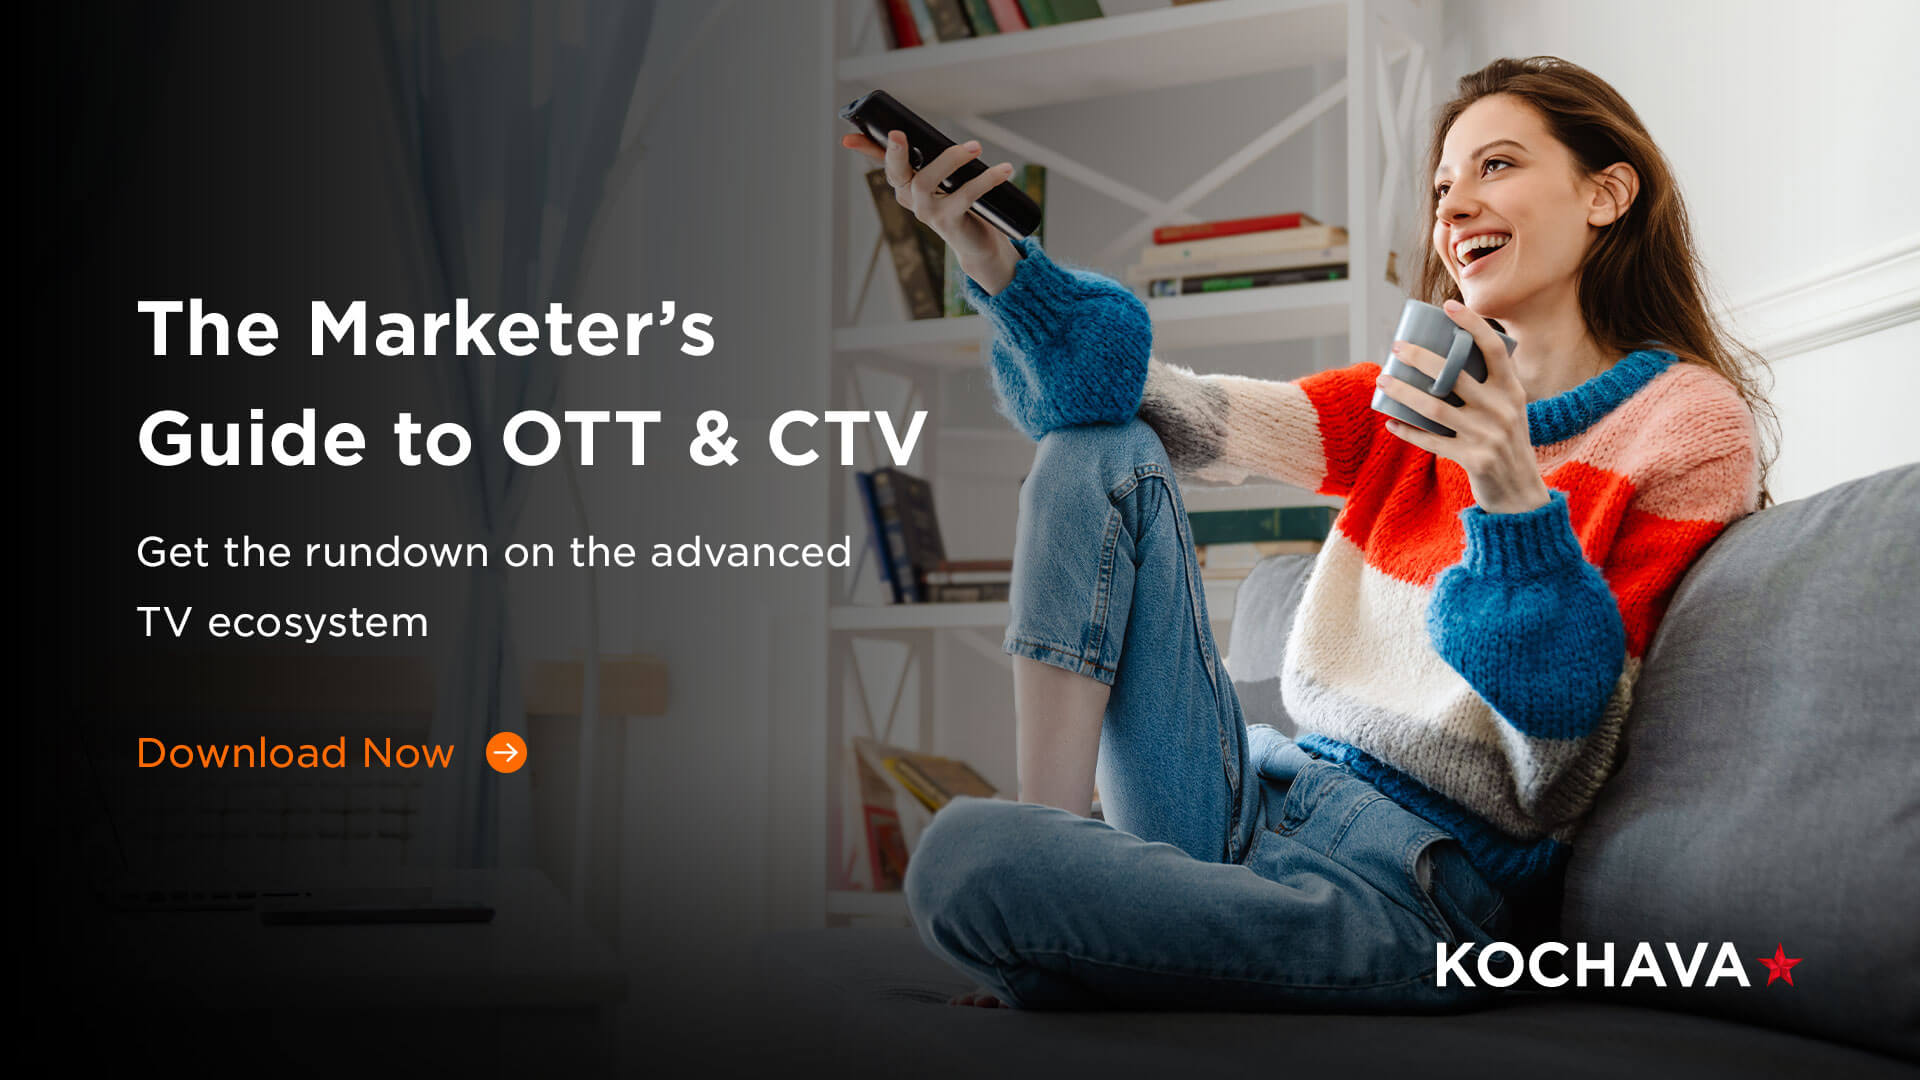 The Marketer’s Guide to Over-the-Top (OTT) and Connected TV (CTV)